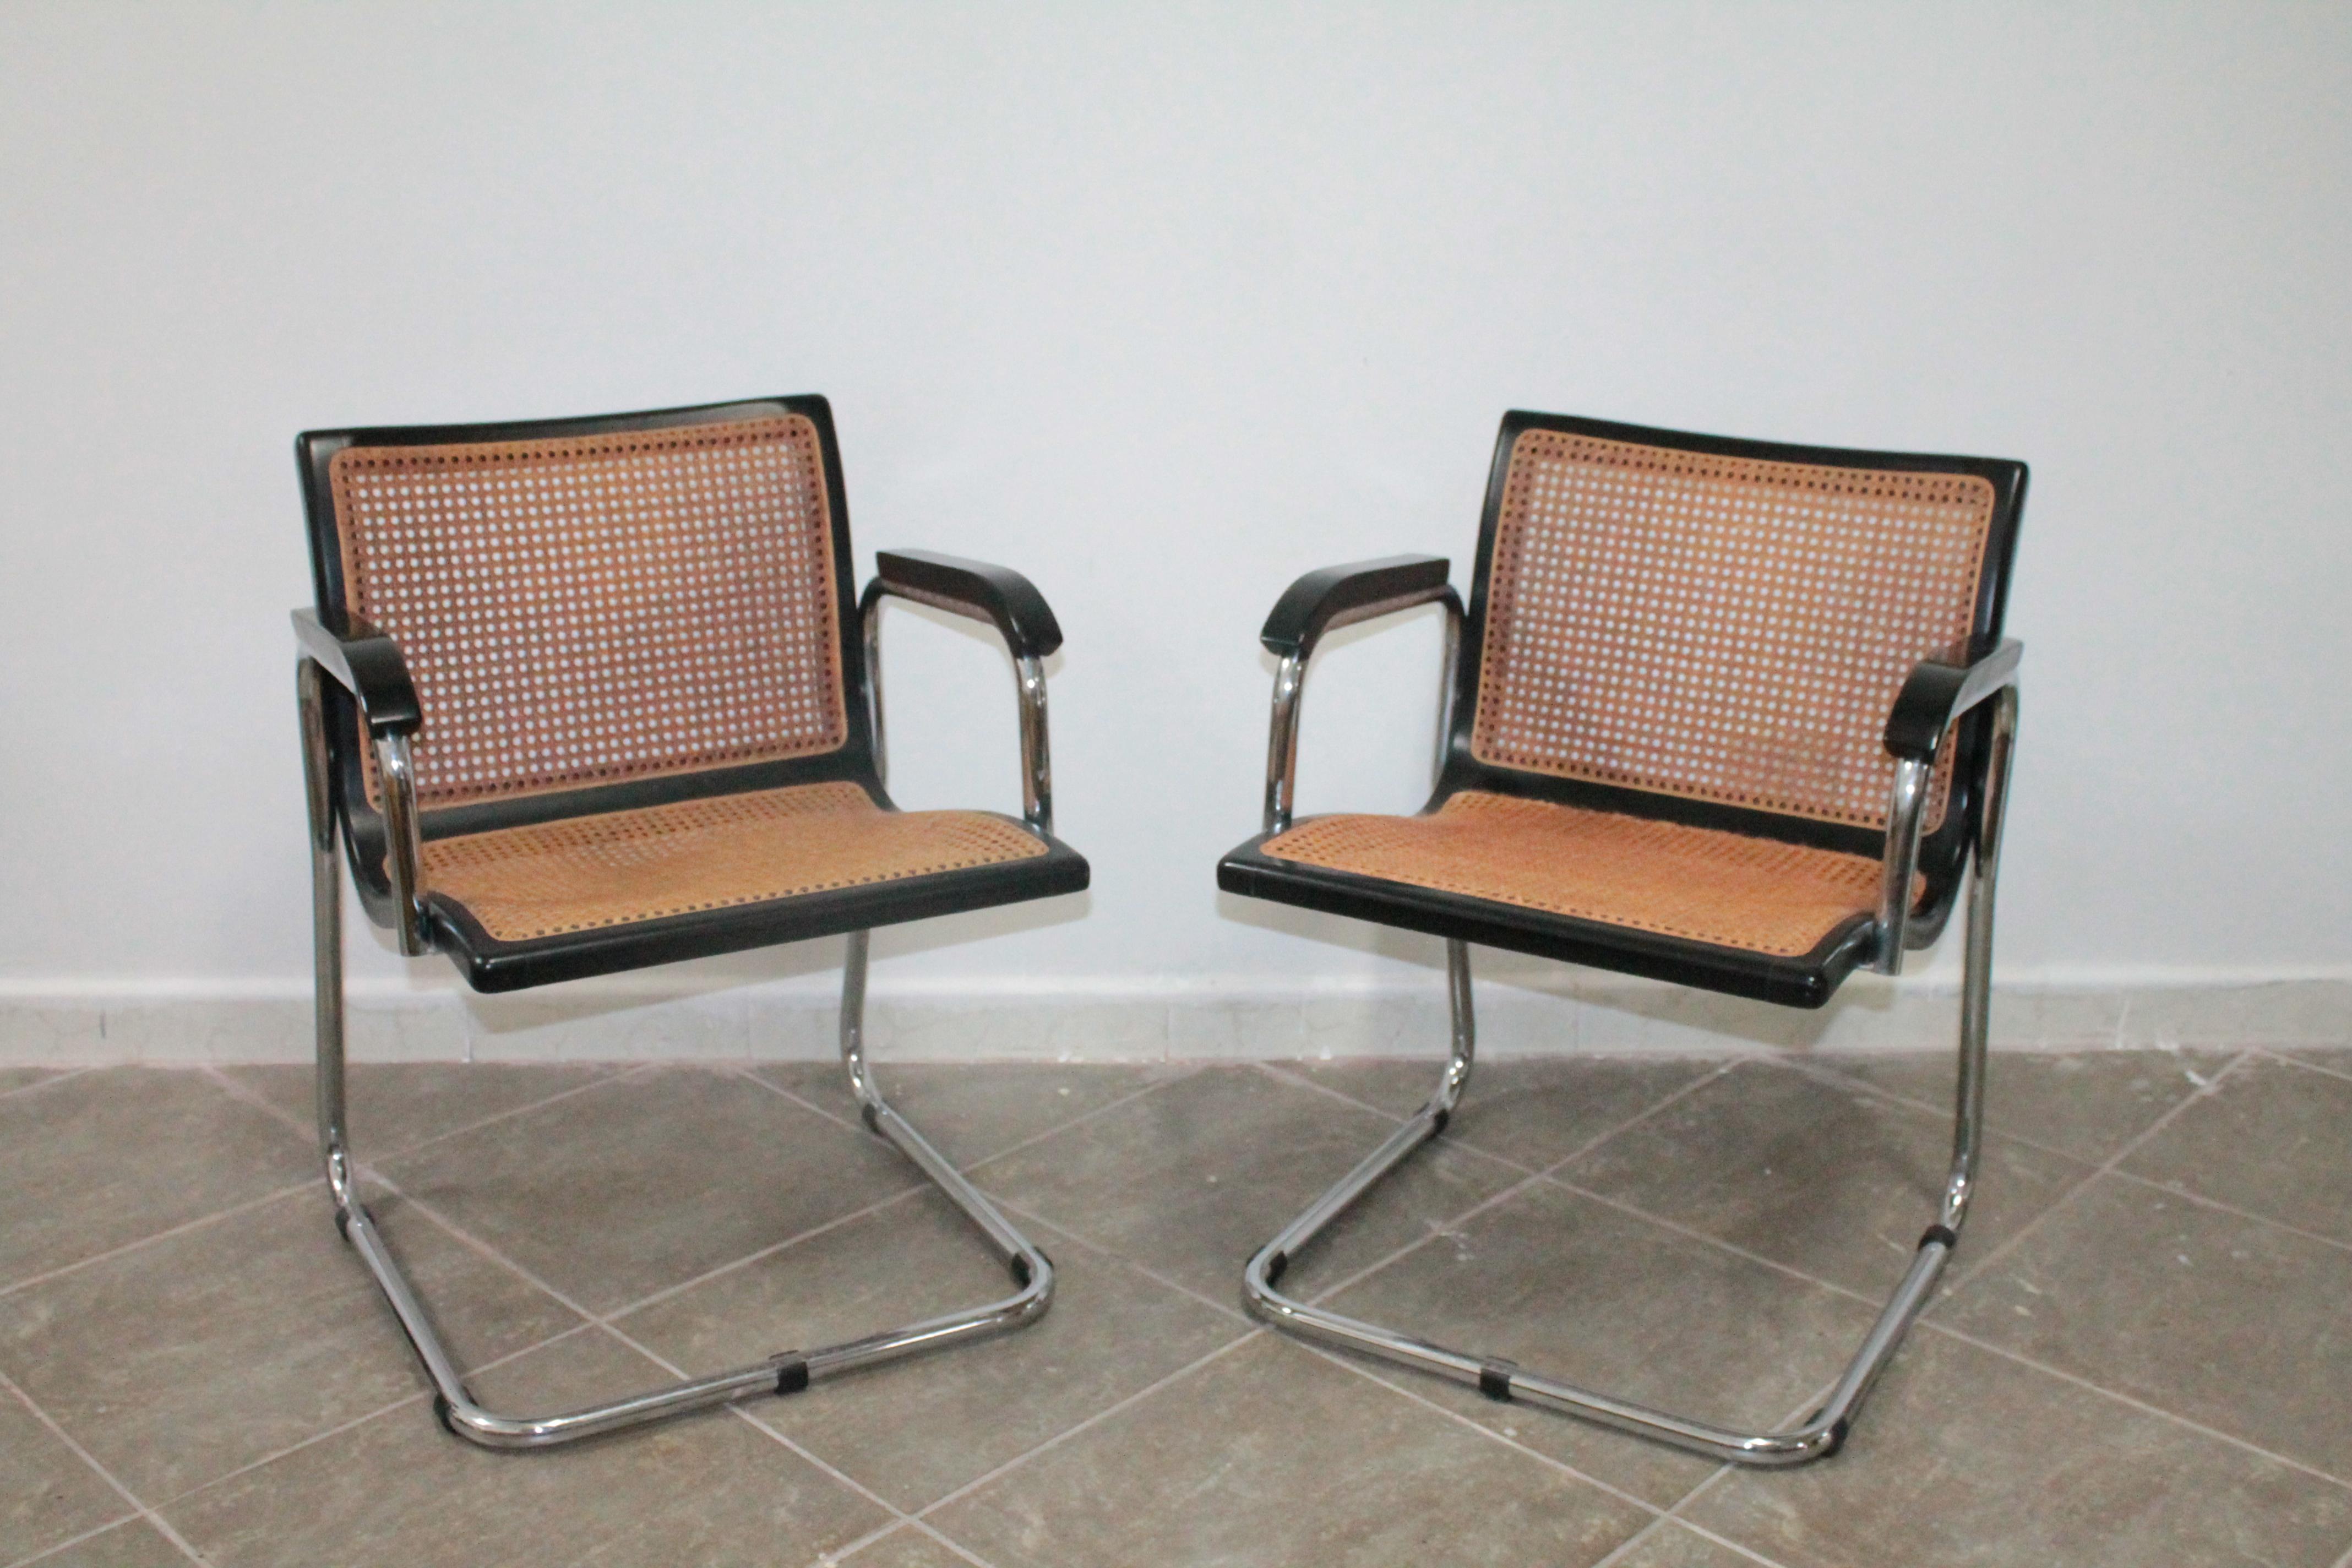 Fabulous pair of 1970s armchairs in the style of Marcel Breuer chromed tubular structure and original seat in wood and Vienna straw that has small defects.